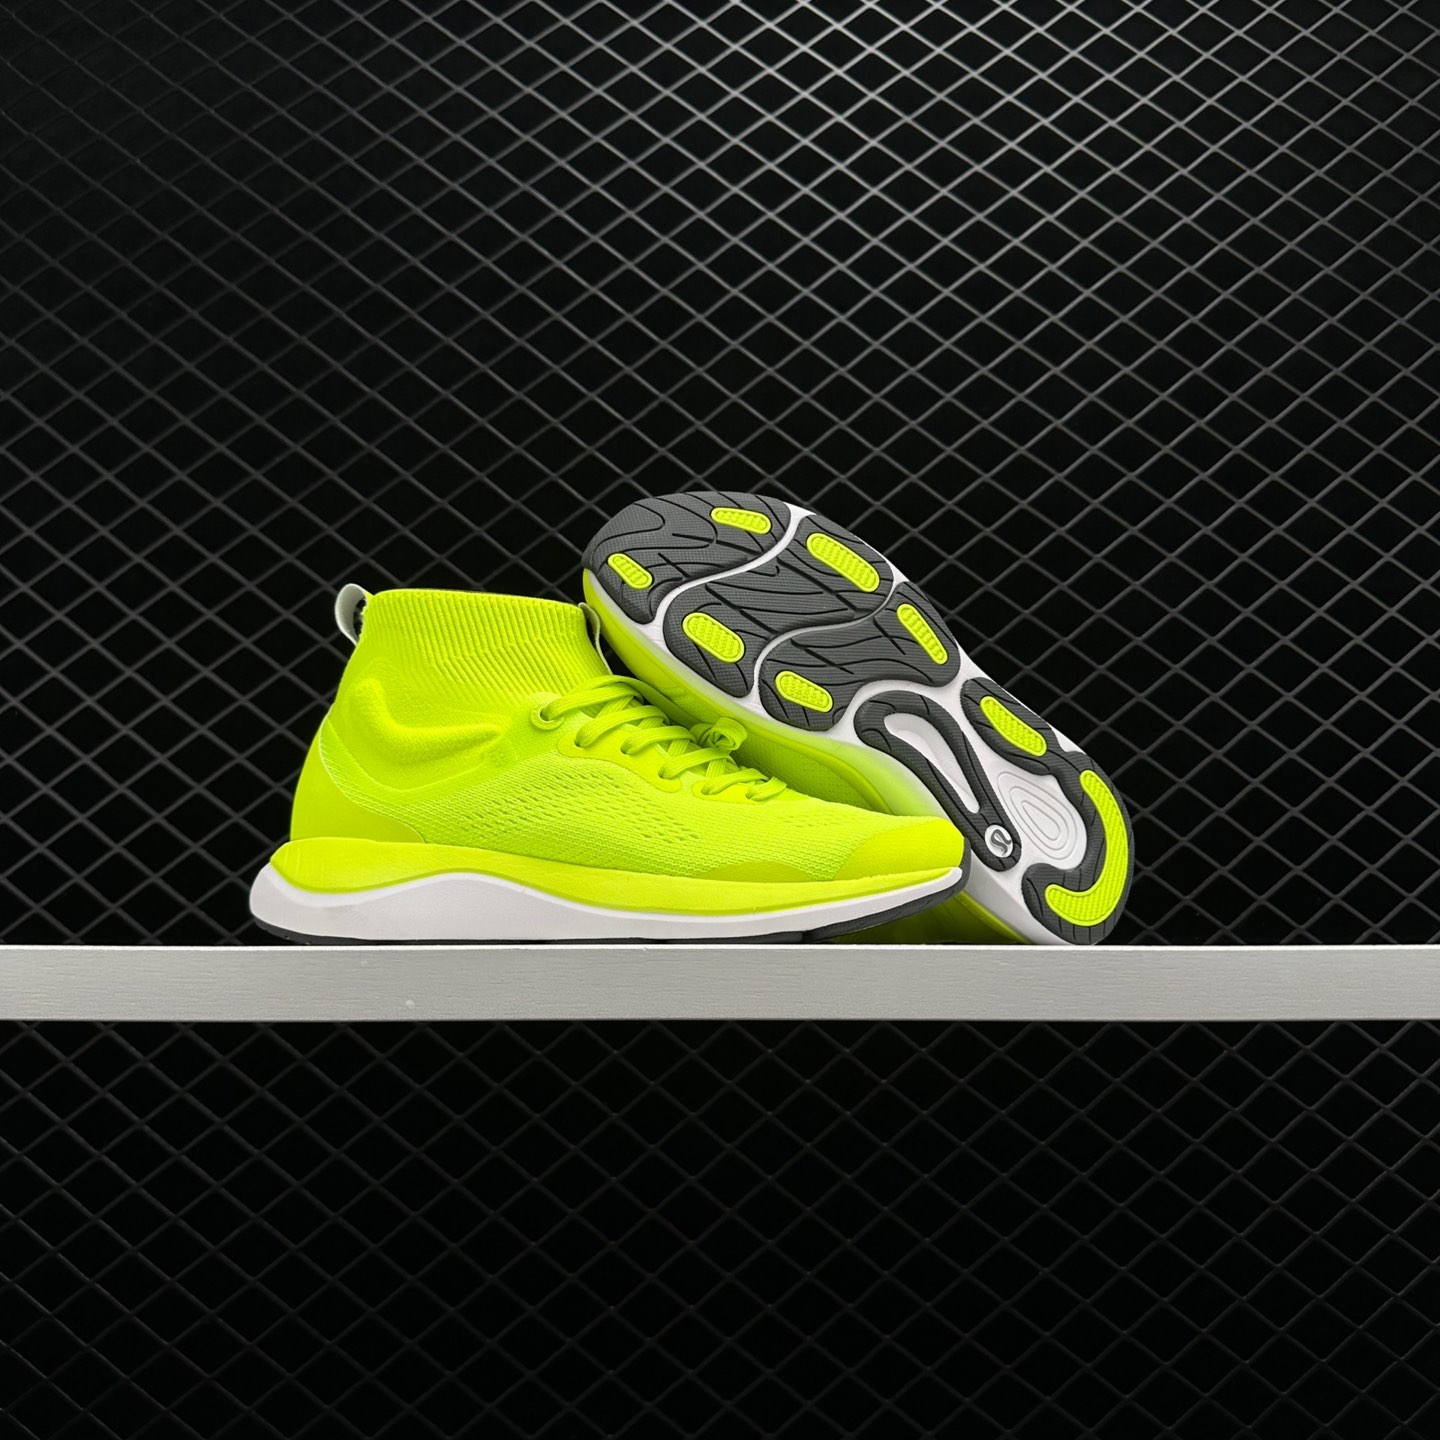 Lululemon Chargefeel Mid Workout Shoes - Yellow & Highlight Green | Top Performance Footwear